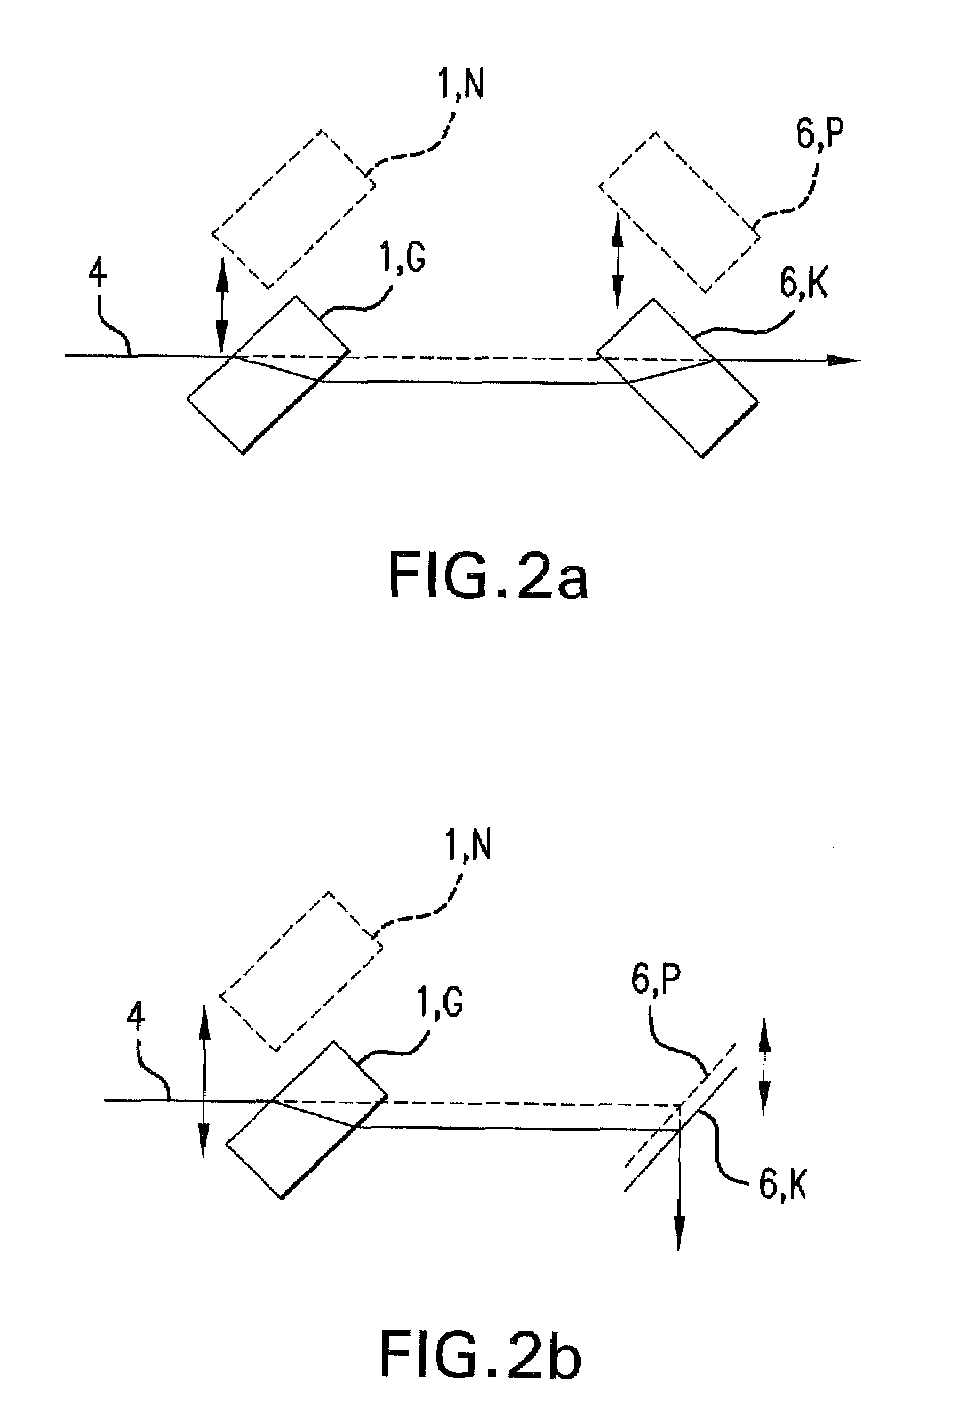 Method and apparatus for changing the length of a laser pulse